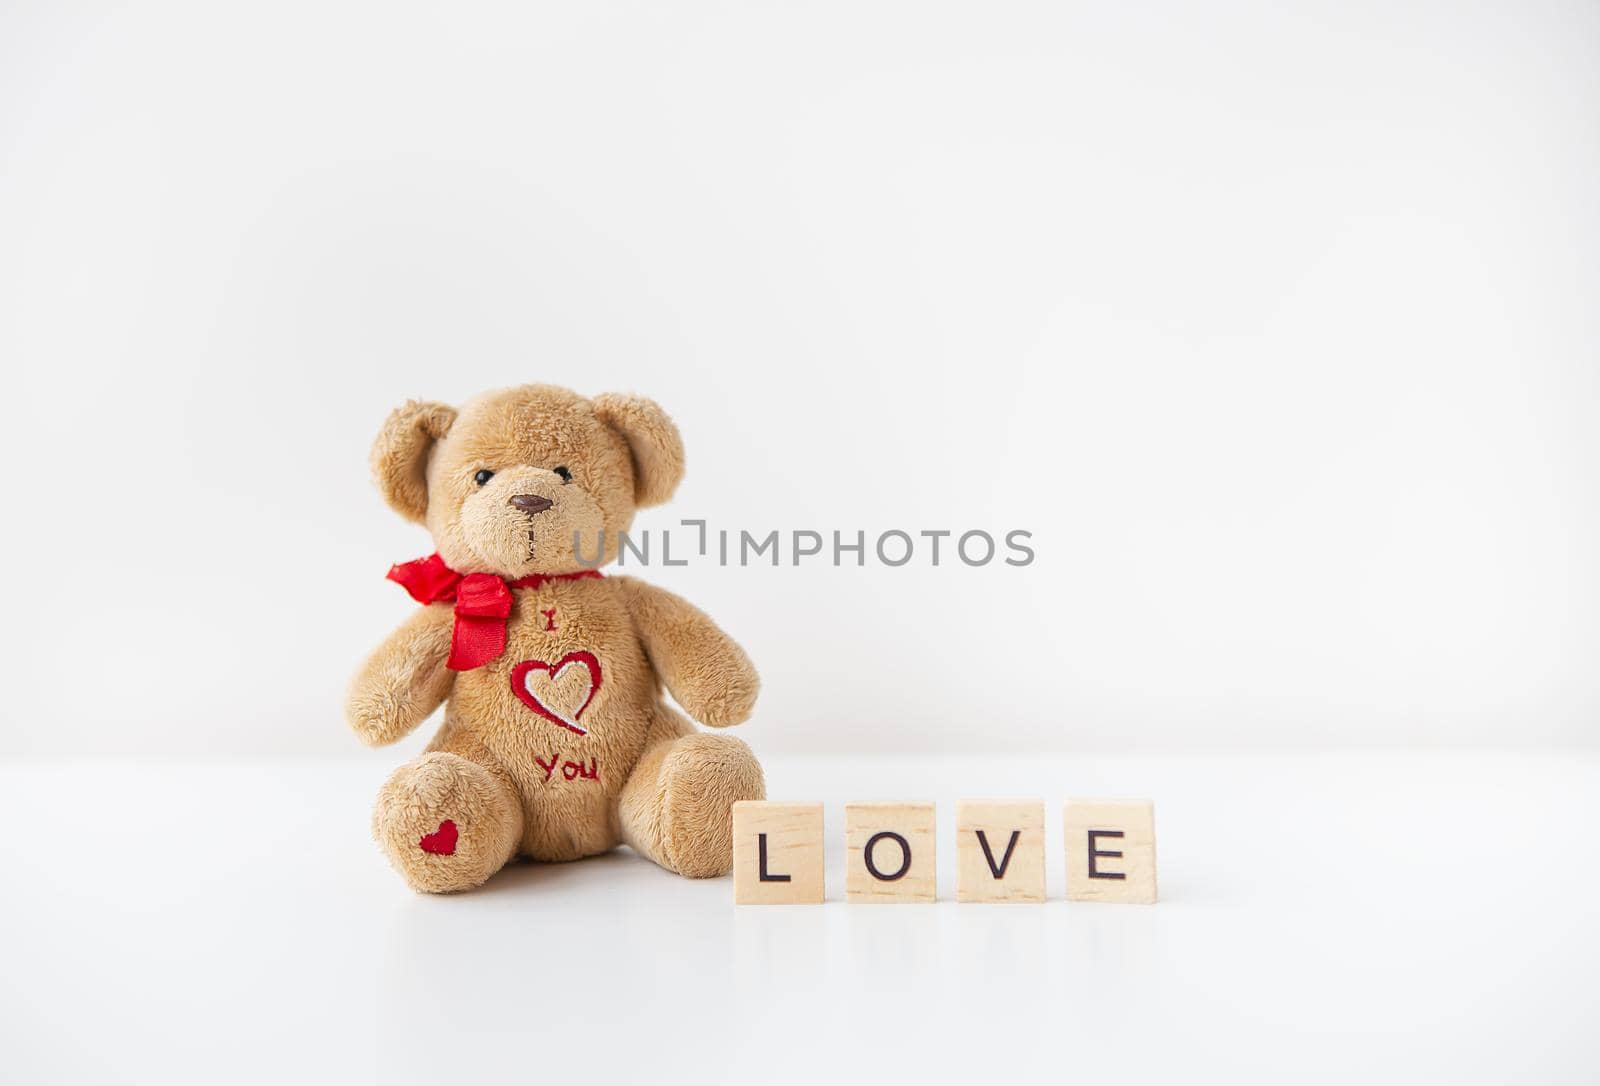 Cute toy teddy bear with a heart isolated on a white background. Love lettering, Valentine's Day holiday concept. by sfinks